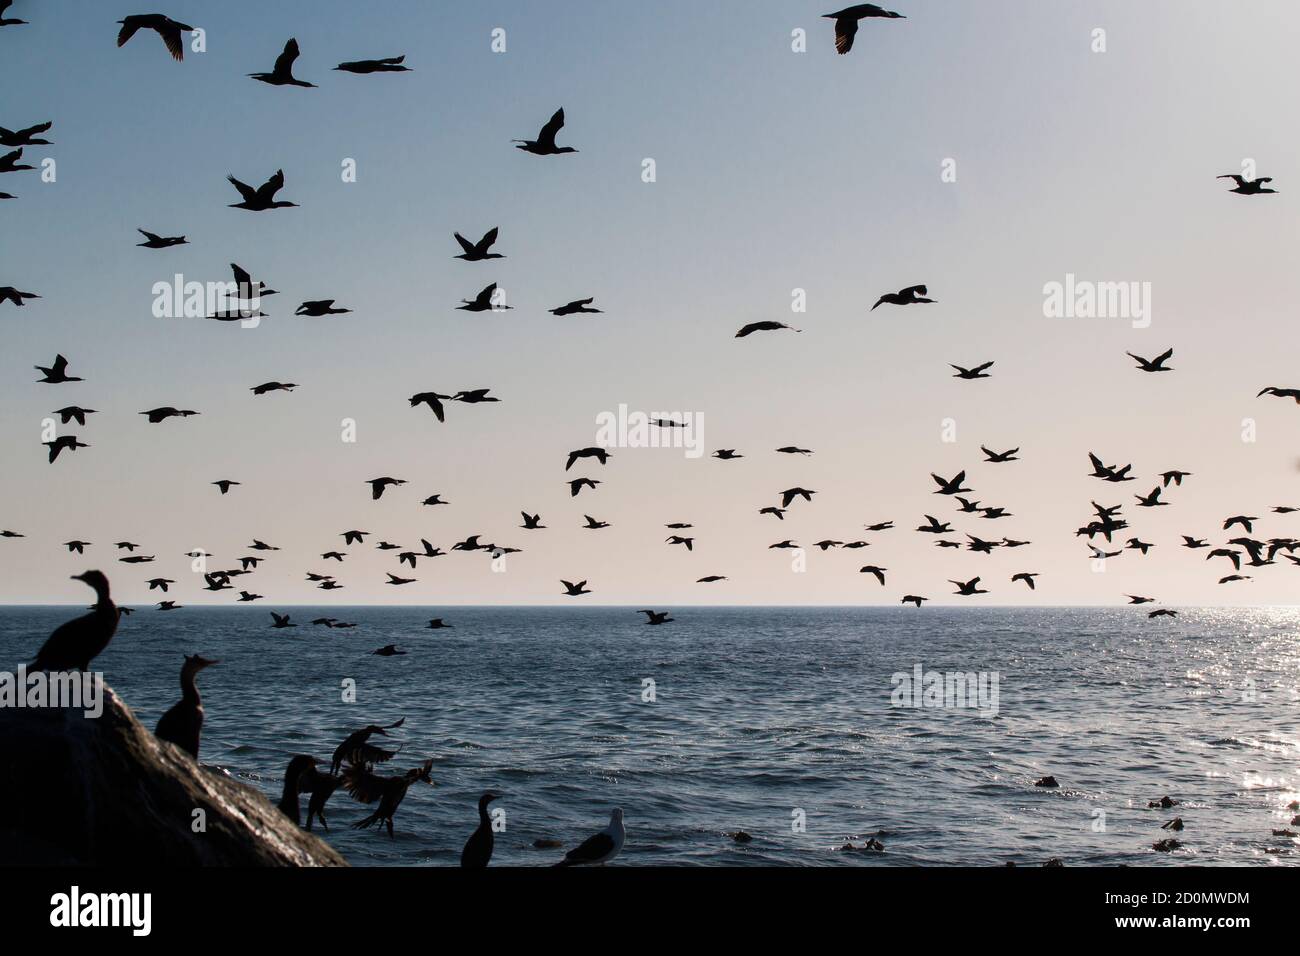 A flock of Cape cormorant or Cape shag (Phalacrocorax capensis) birds flying past over the ocean with a rock in the foreground Stock Photo